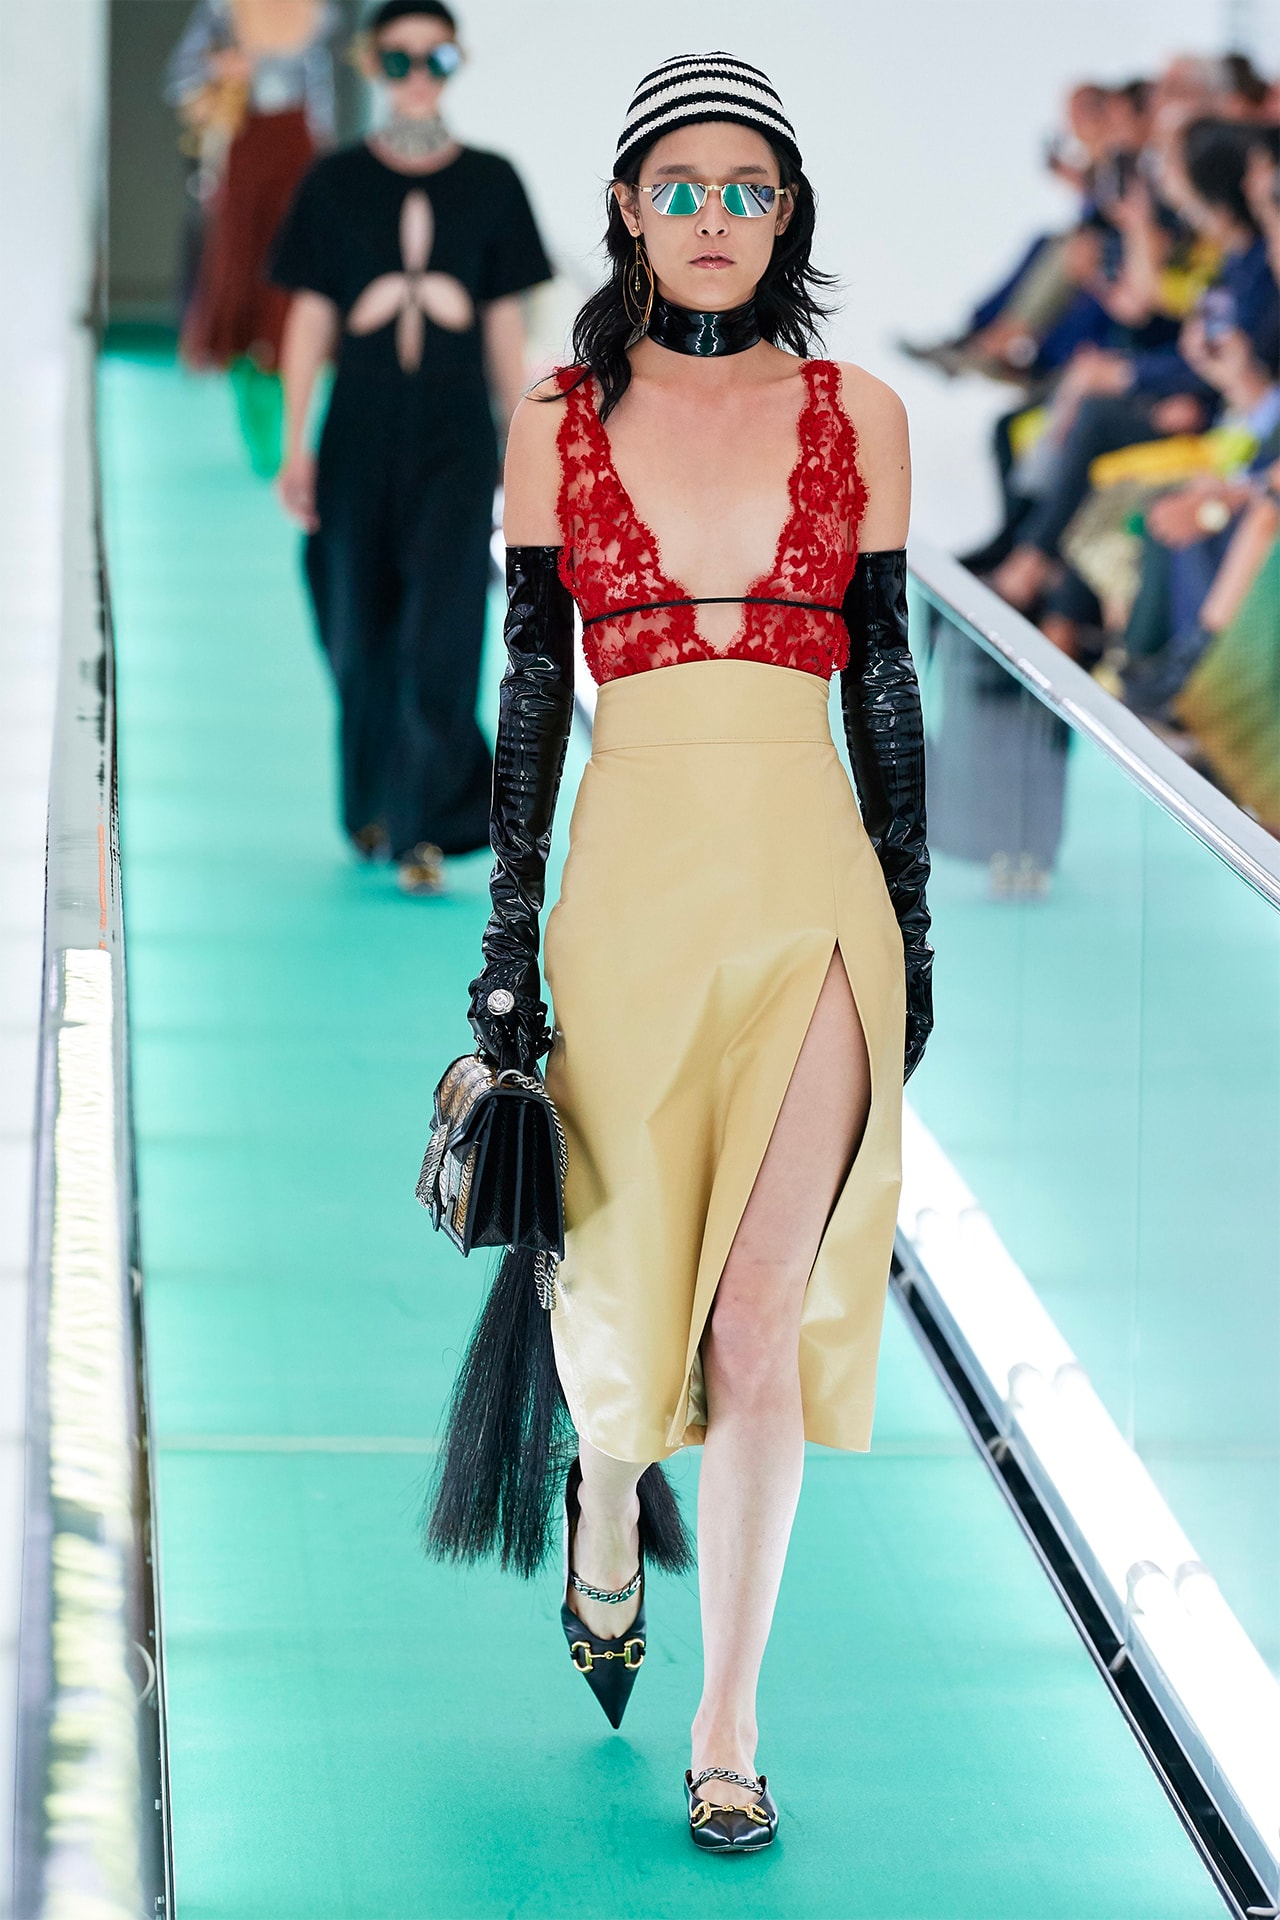 Gucci Orgasmique Spring Summer 2020 Runway Show Milan Fashion Week SS20 red lace top skirt flogger whip